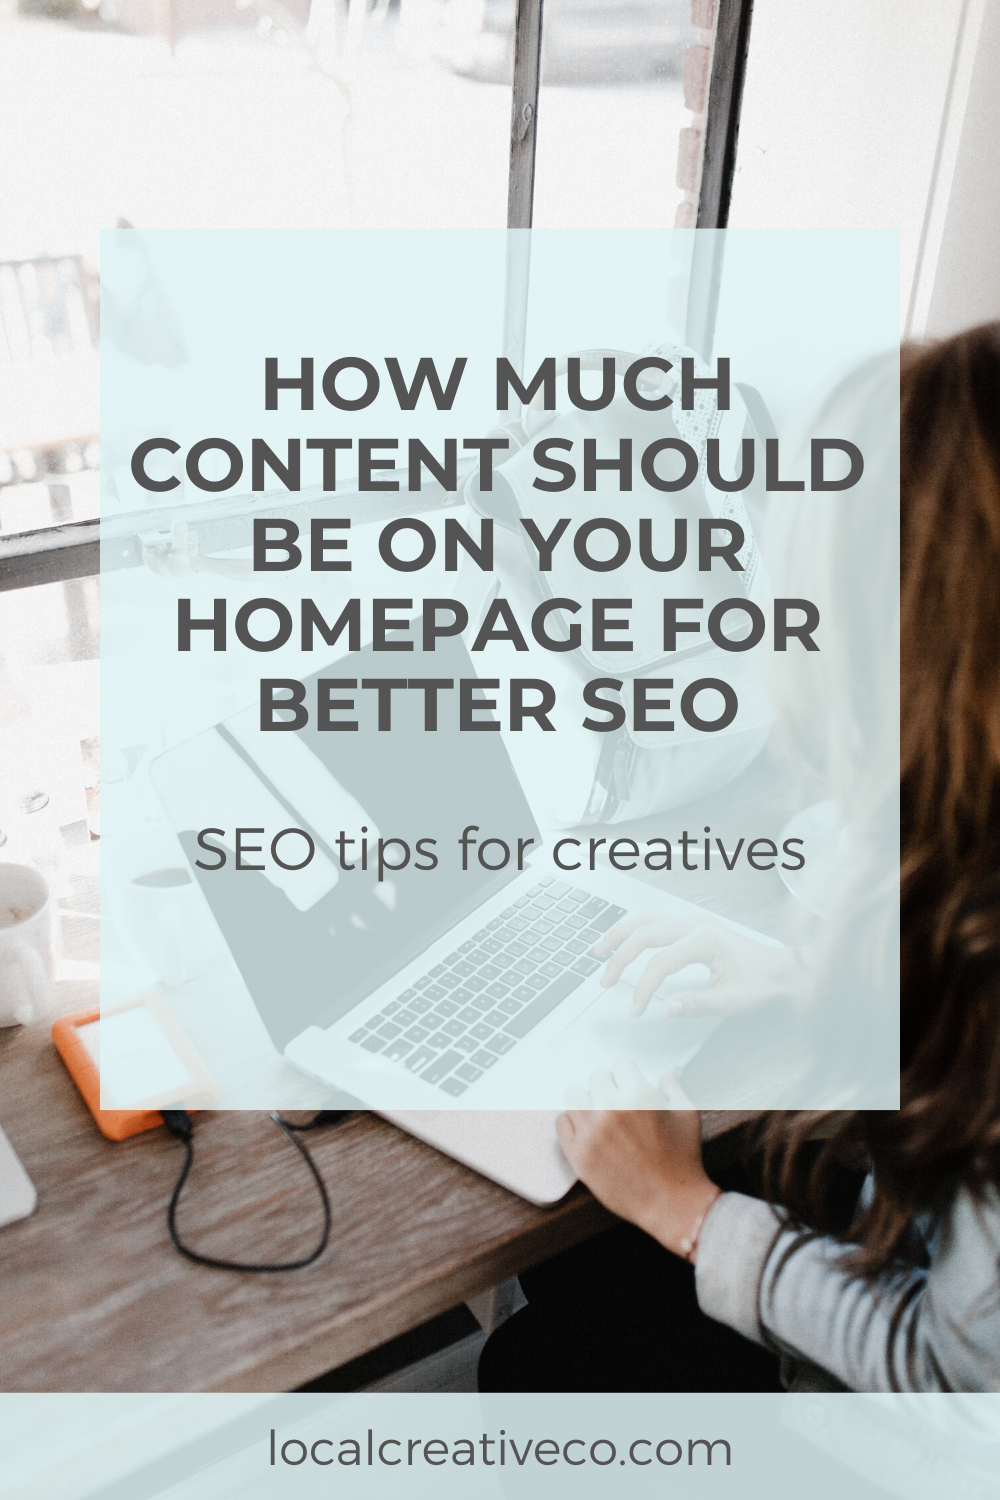 How Many Words for Better SEO Content on Your Homepage